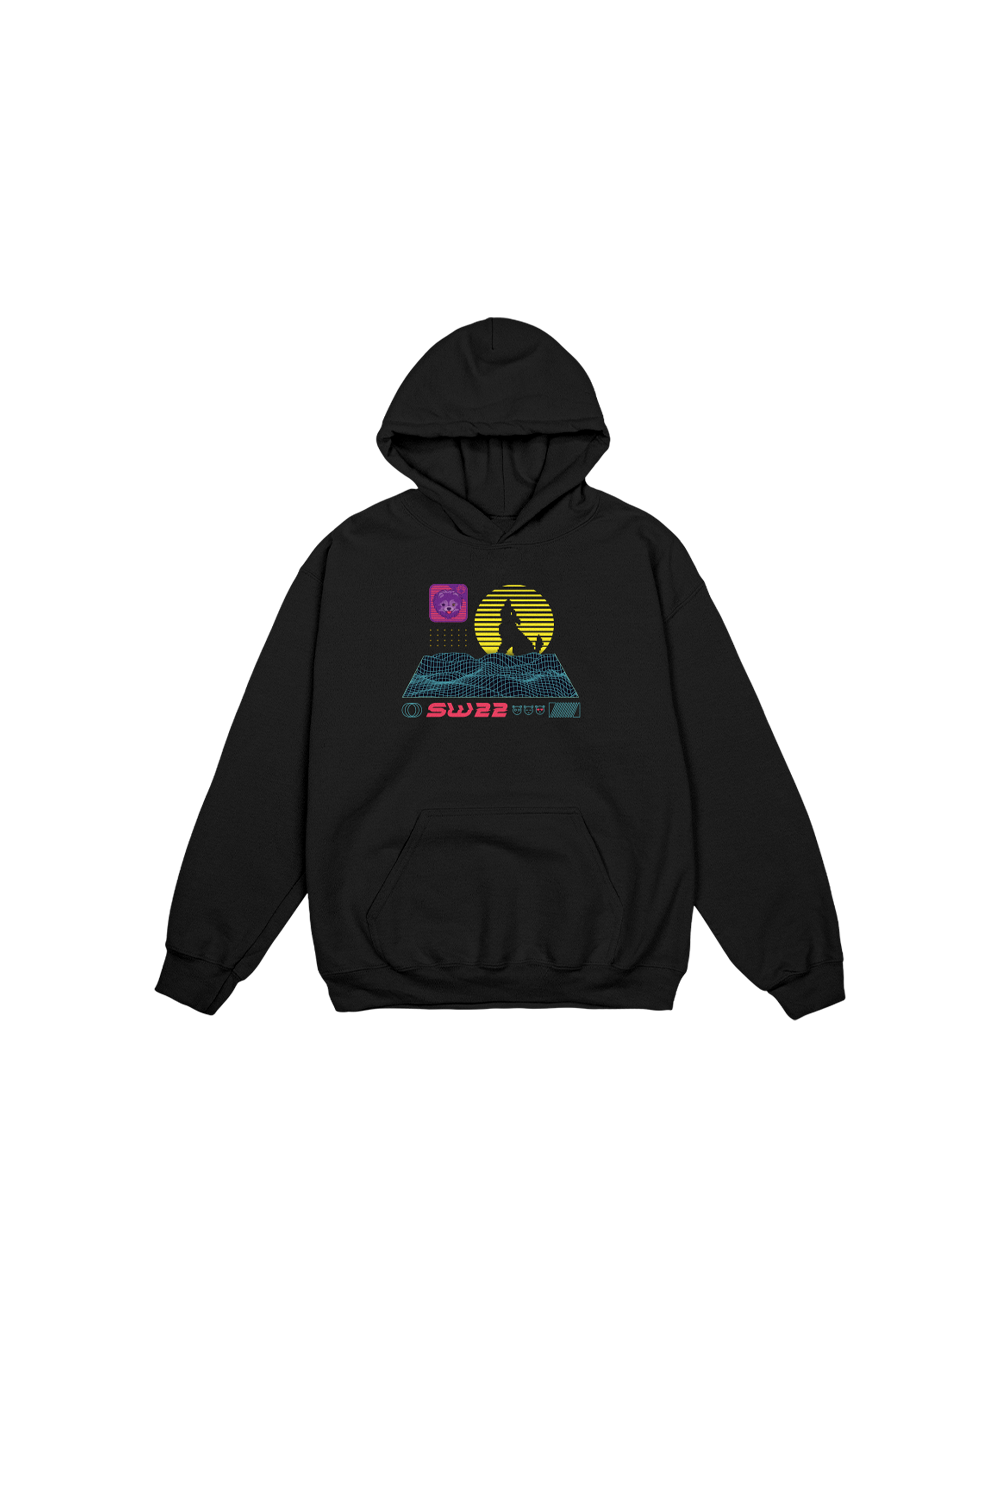 Synthwave Youth Black Hoodie